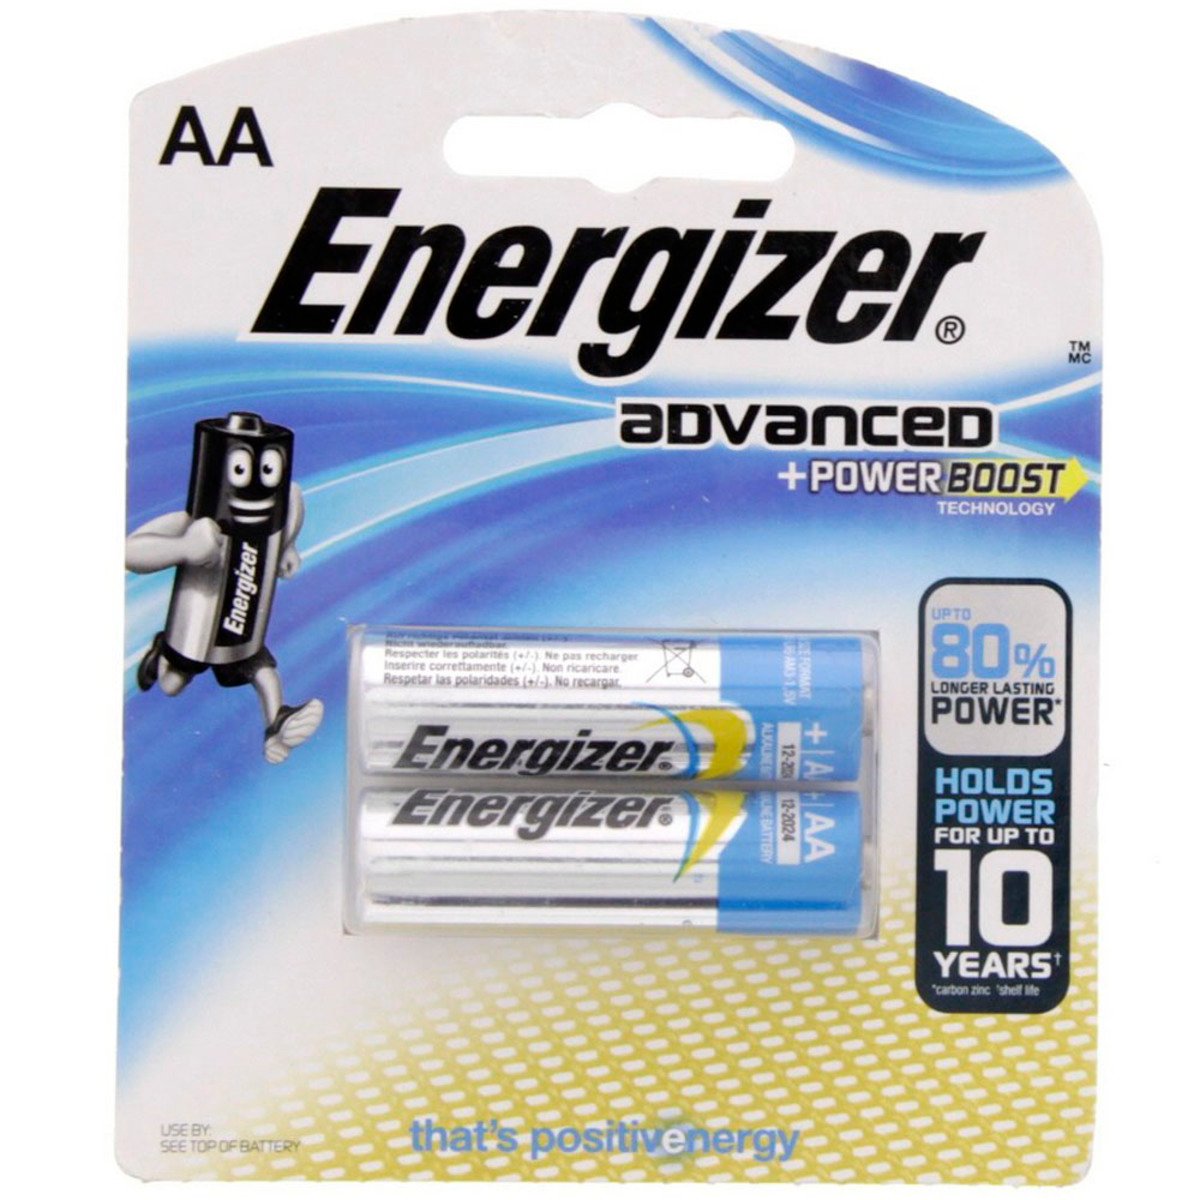 Energizer Advanced +Power Boost AA Battery X91RP2